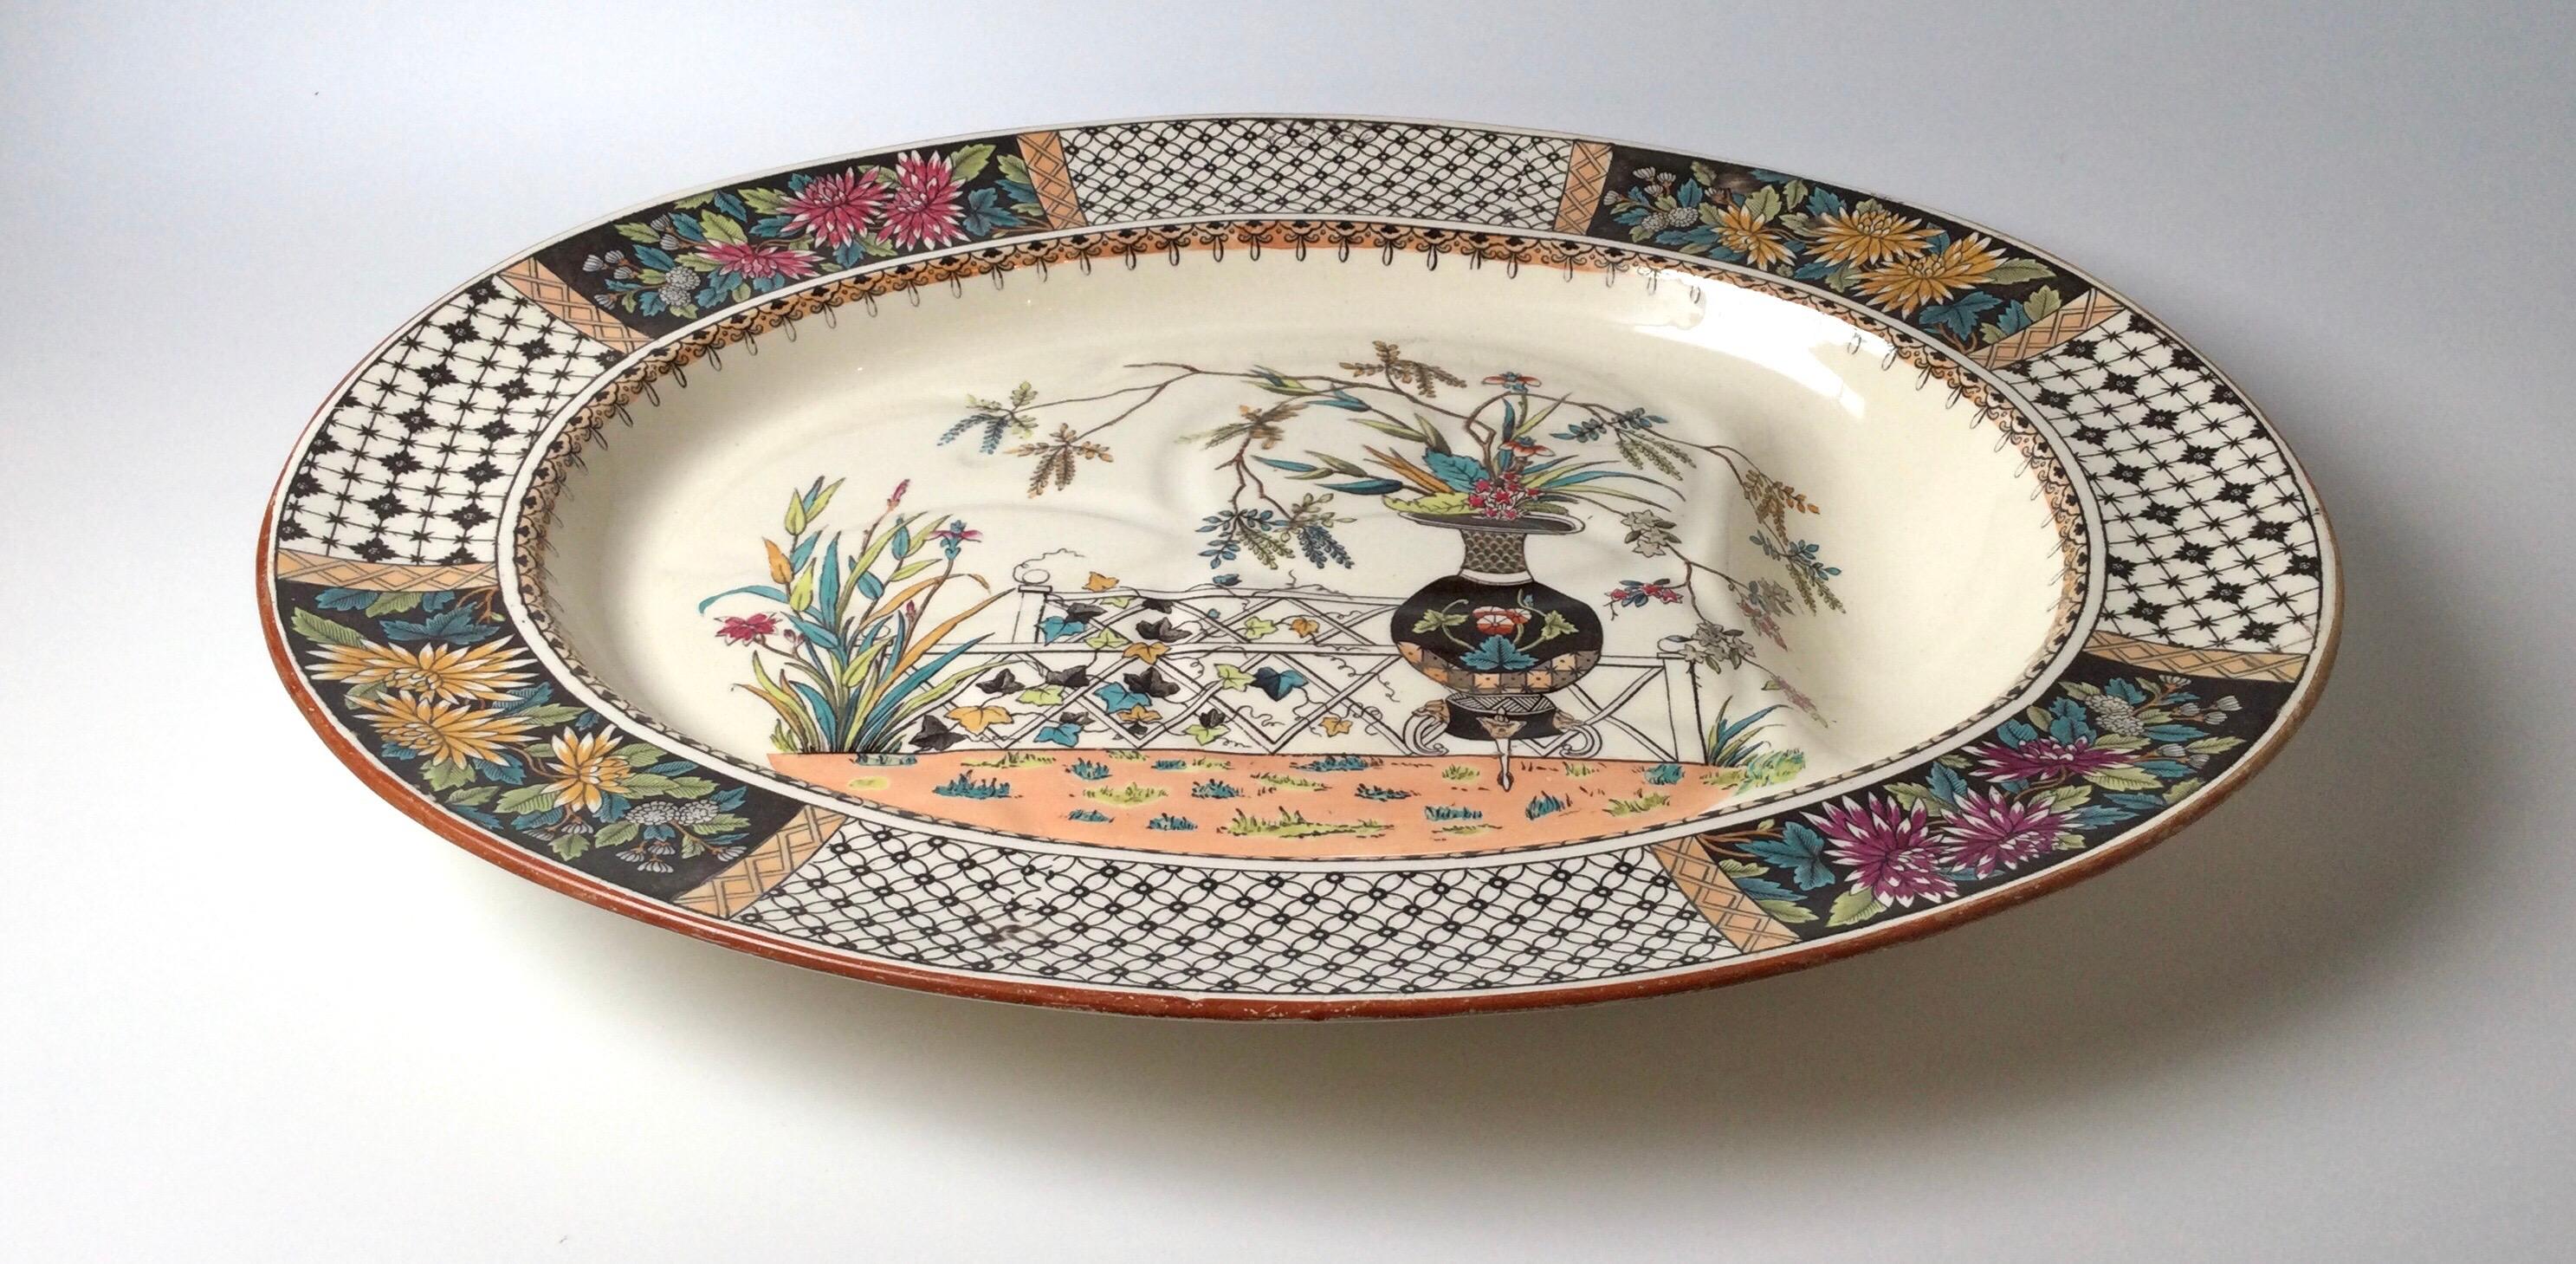 Oversized Copland England Aesthetic period footed meat platter in the Chrysanthemum design. Drainage indentation leads to a deep gravy well. 21 by 17